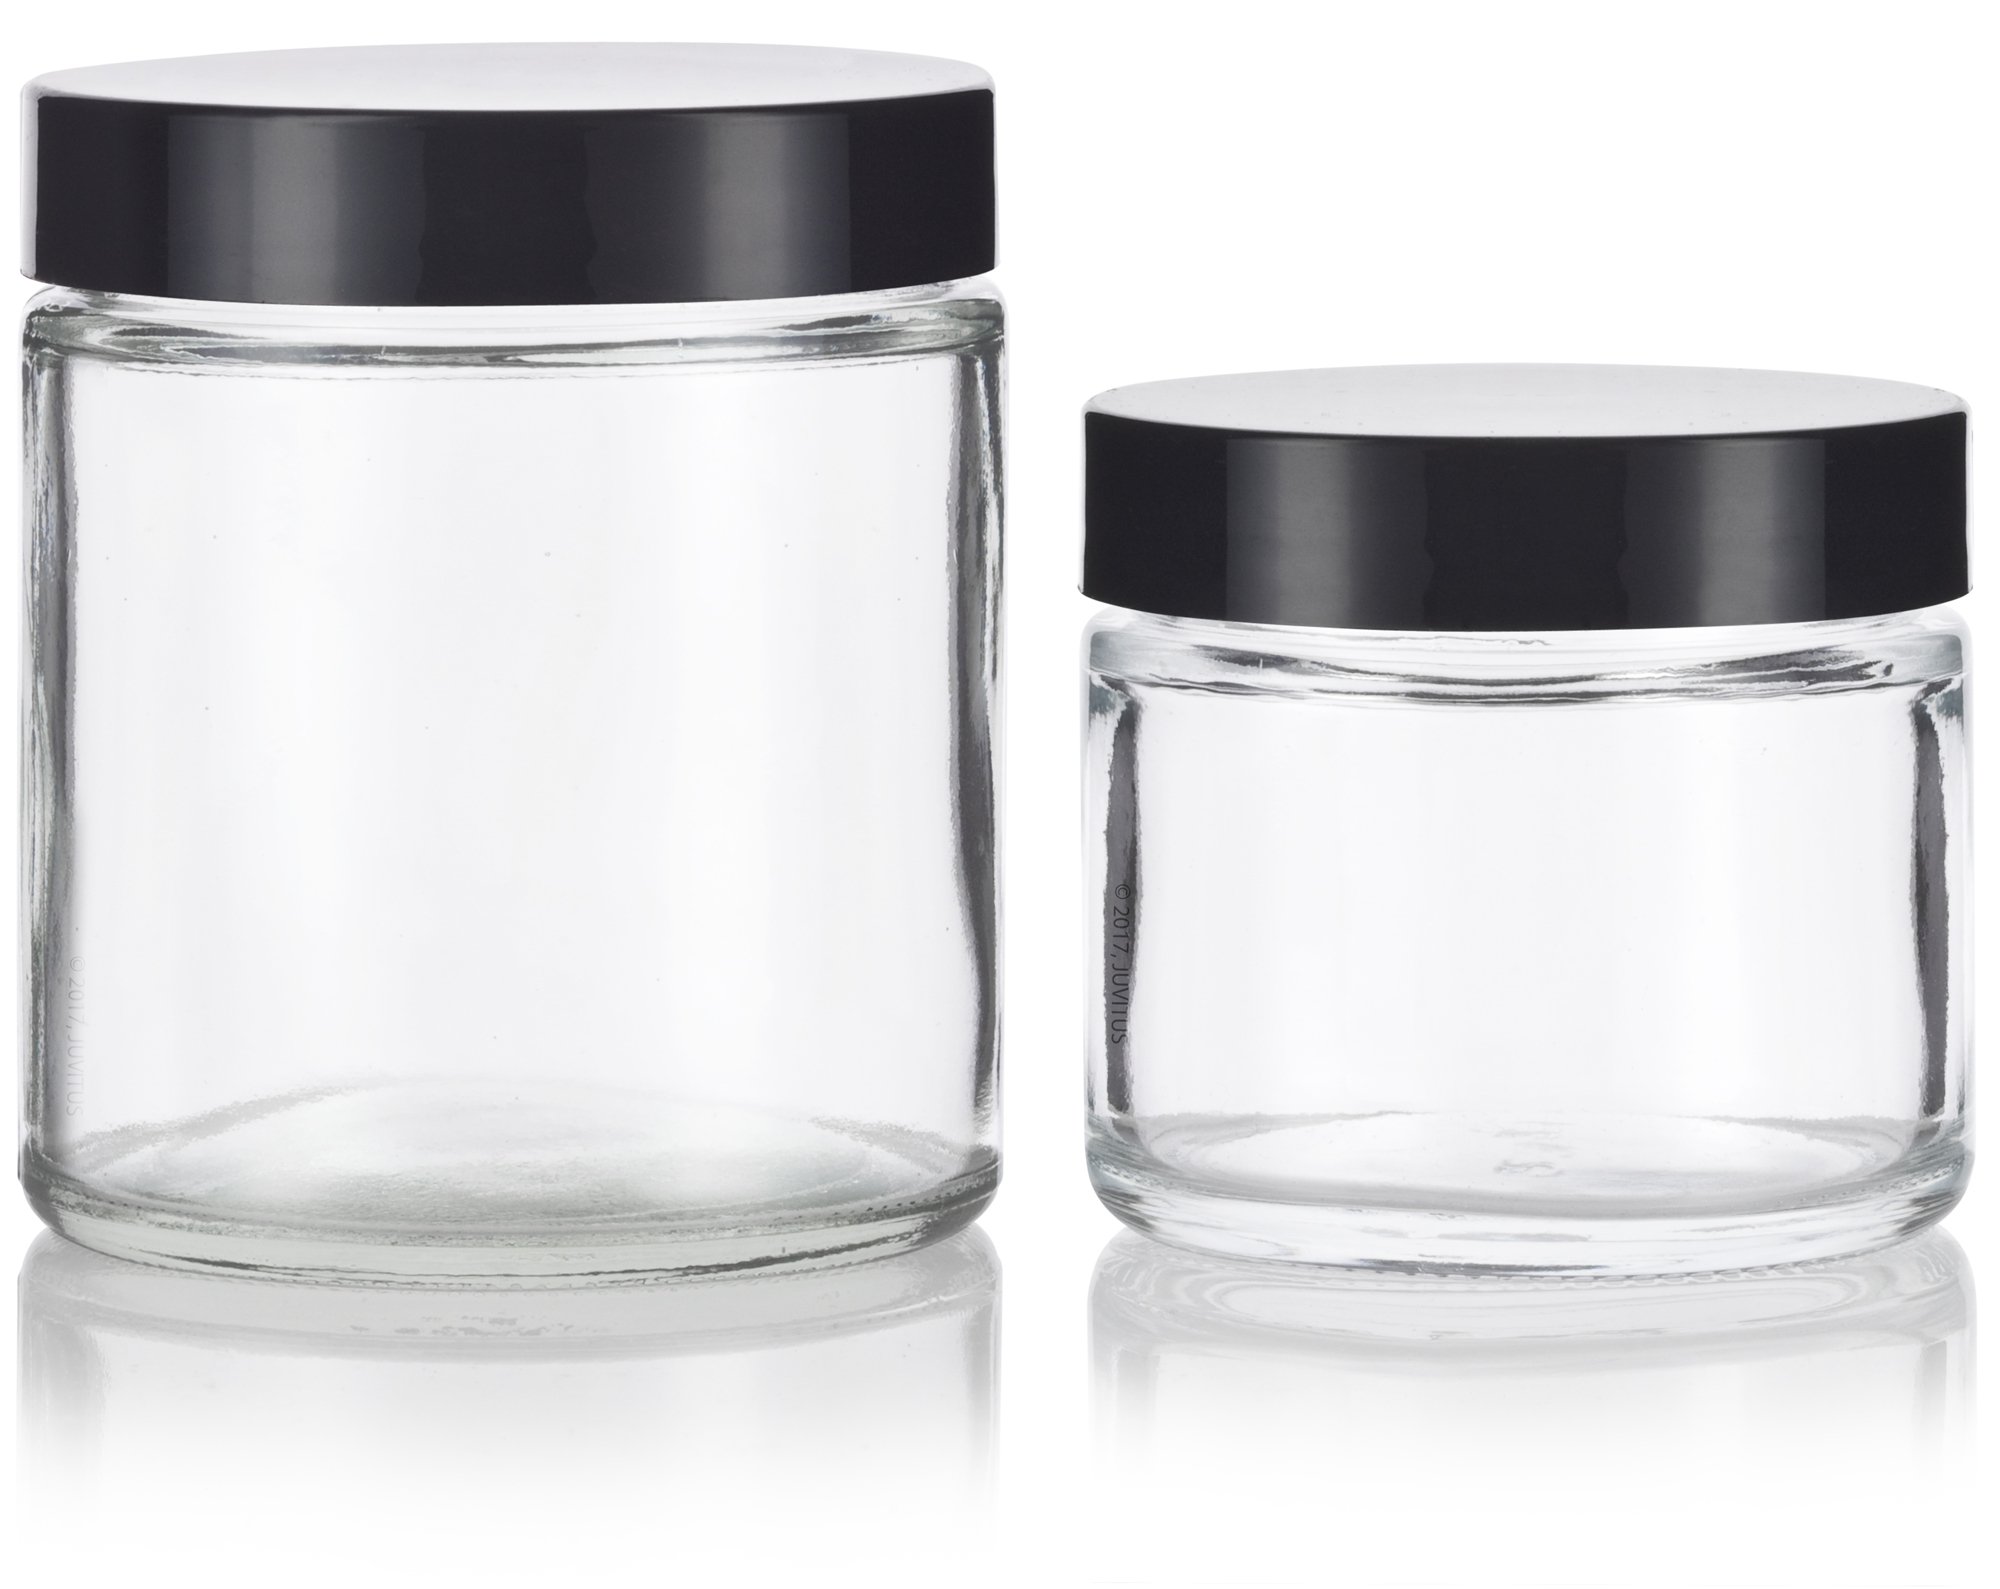 JUVITUS Clear Thick Glass Straight Sided Jar Set (6 Pack) 3-2 oz / 60 ml and 3-4 oz/ 120 ml + Spatulas